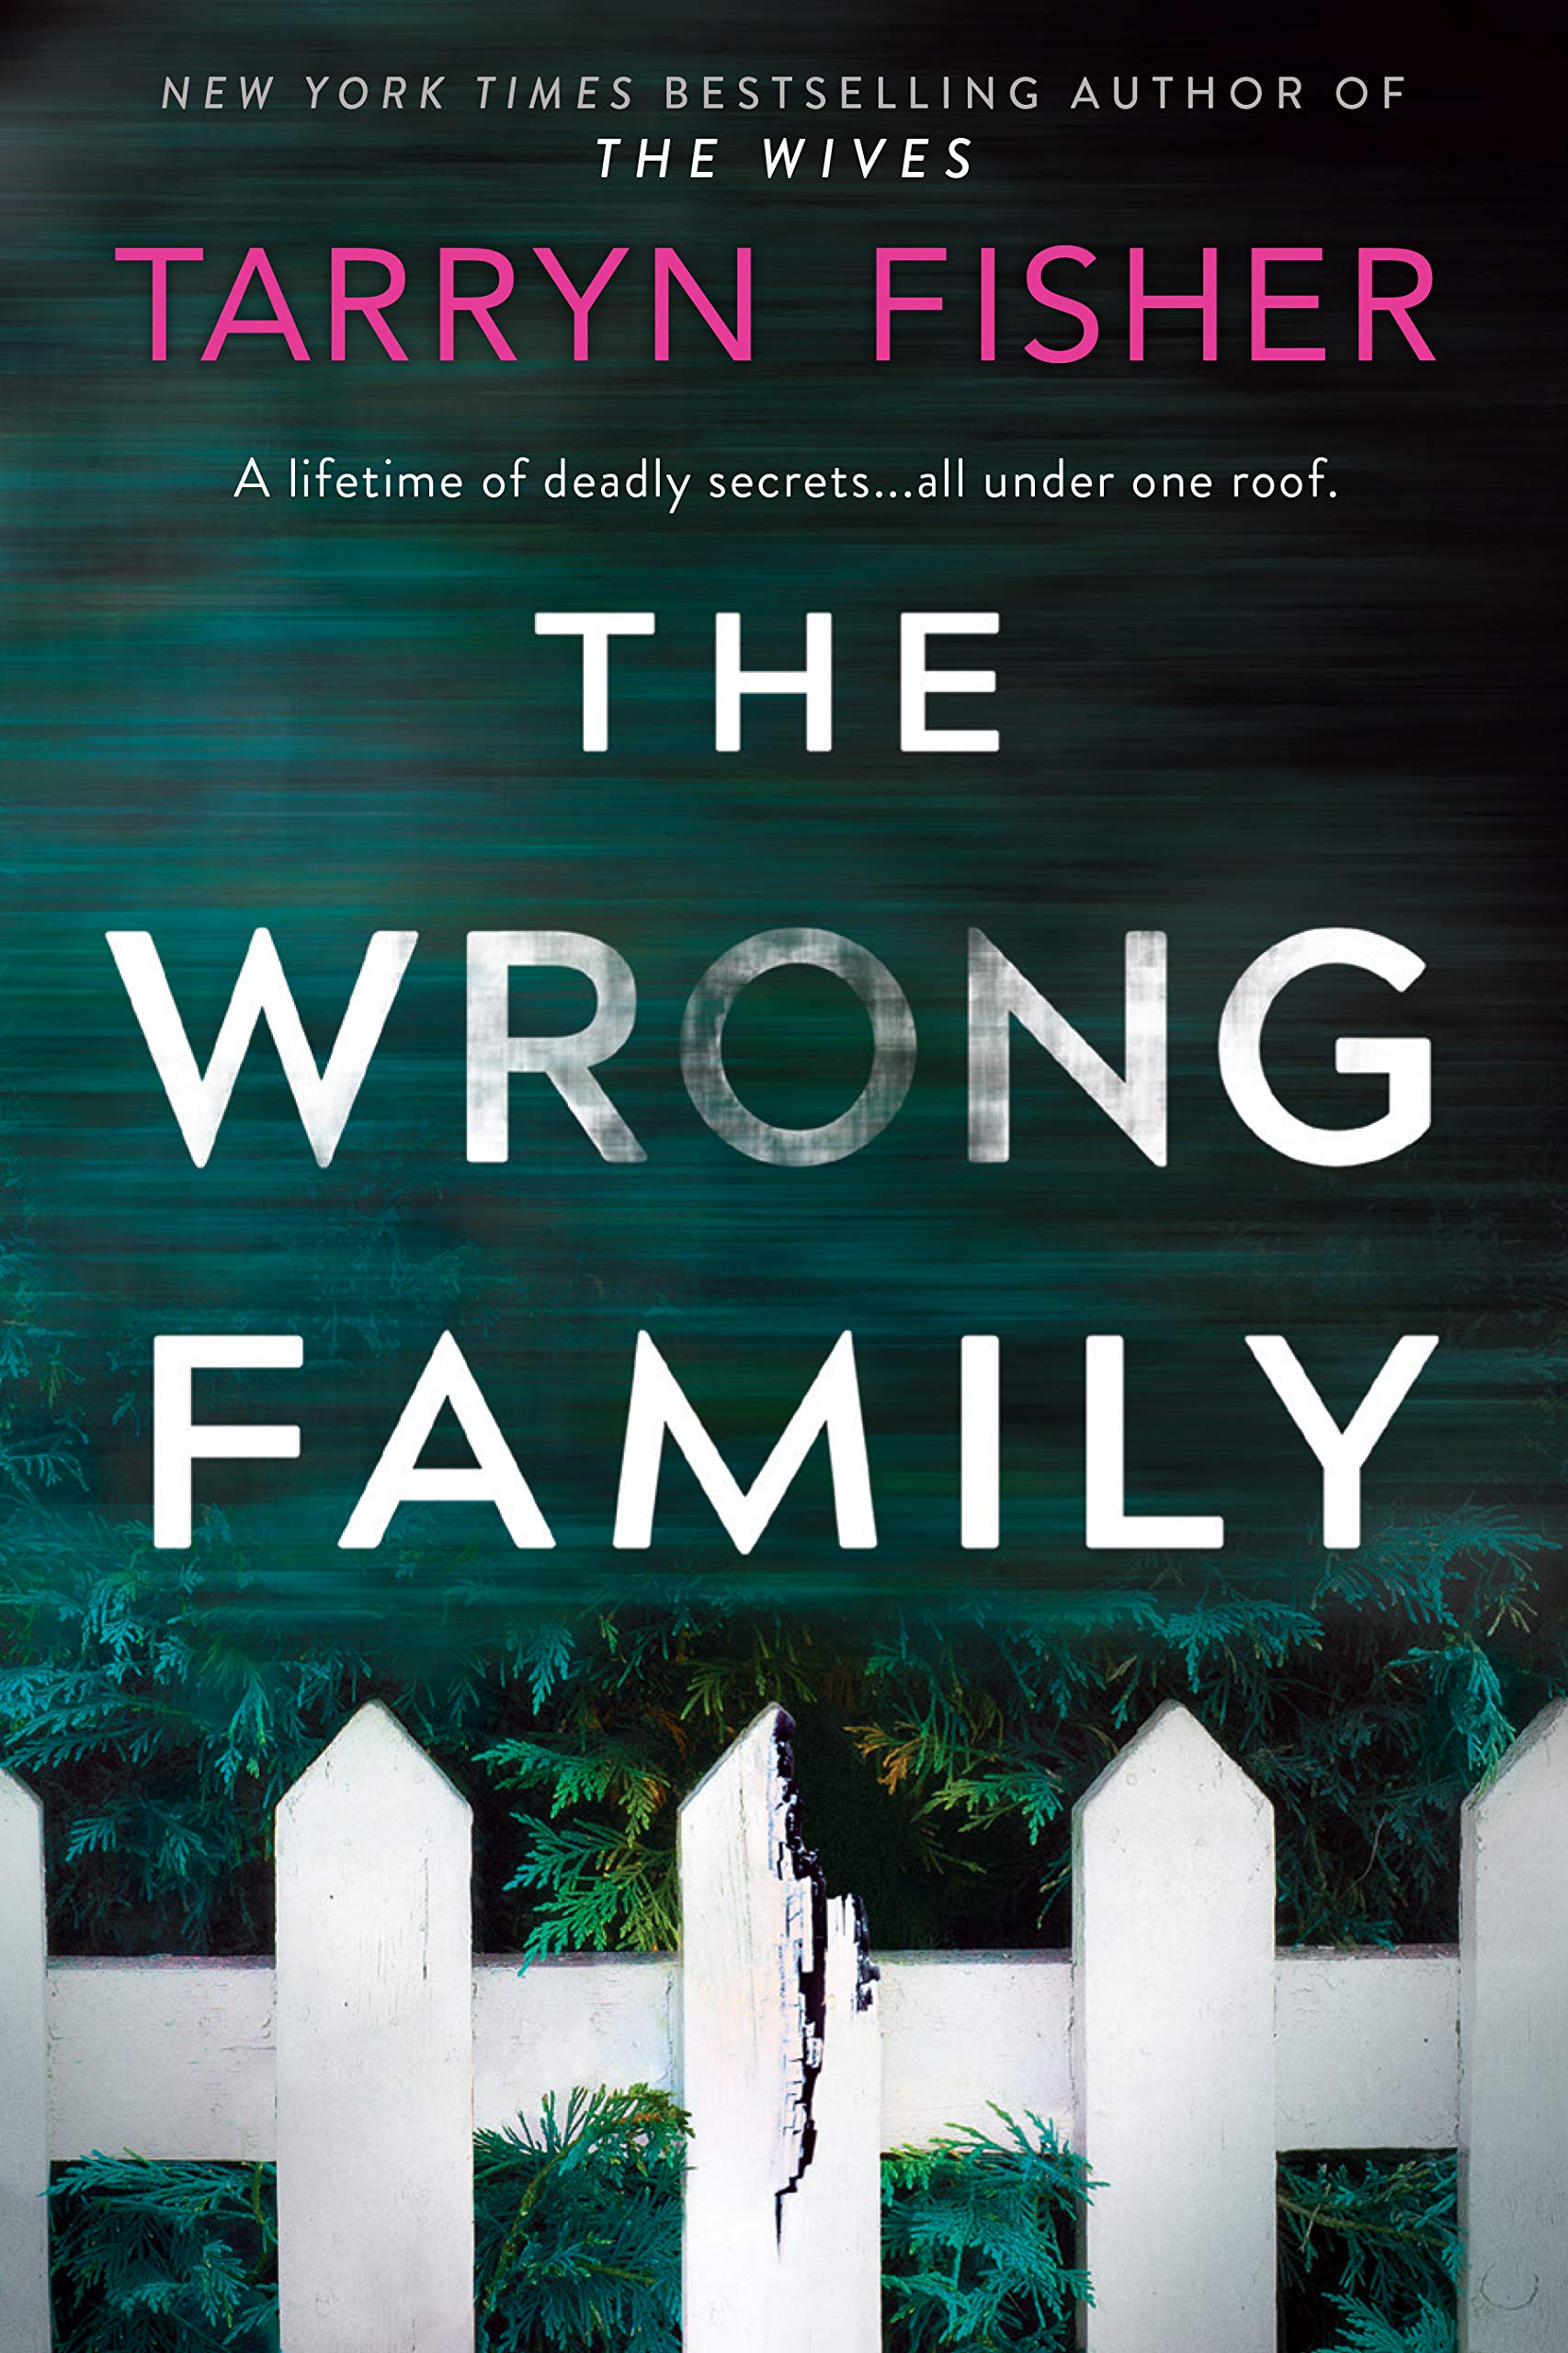 When Will The Wrong Family By Tarryn Fisher Release? 2020 Psychological Thriller Releases